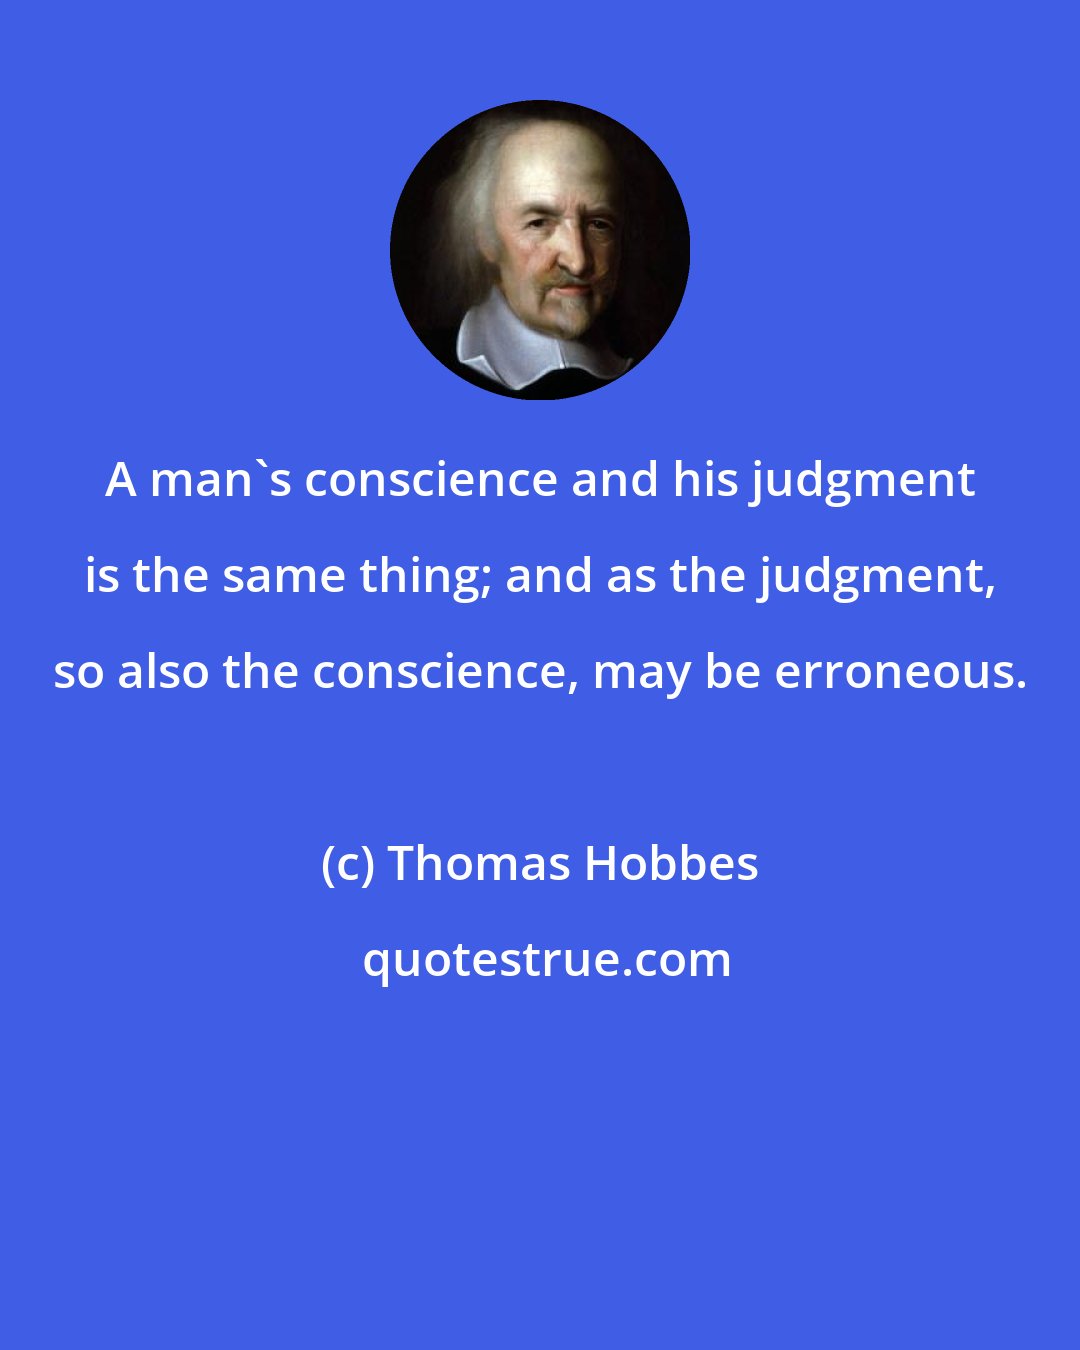 Thomas Hobbes: A man's conscience and his judgment is the same thing; and as the judgment, so also the conscience, may be erroneous.